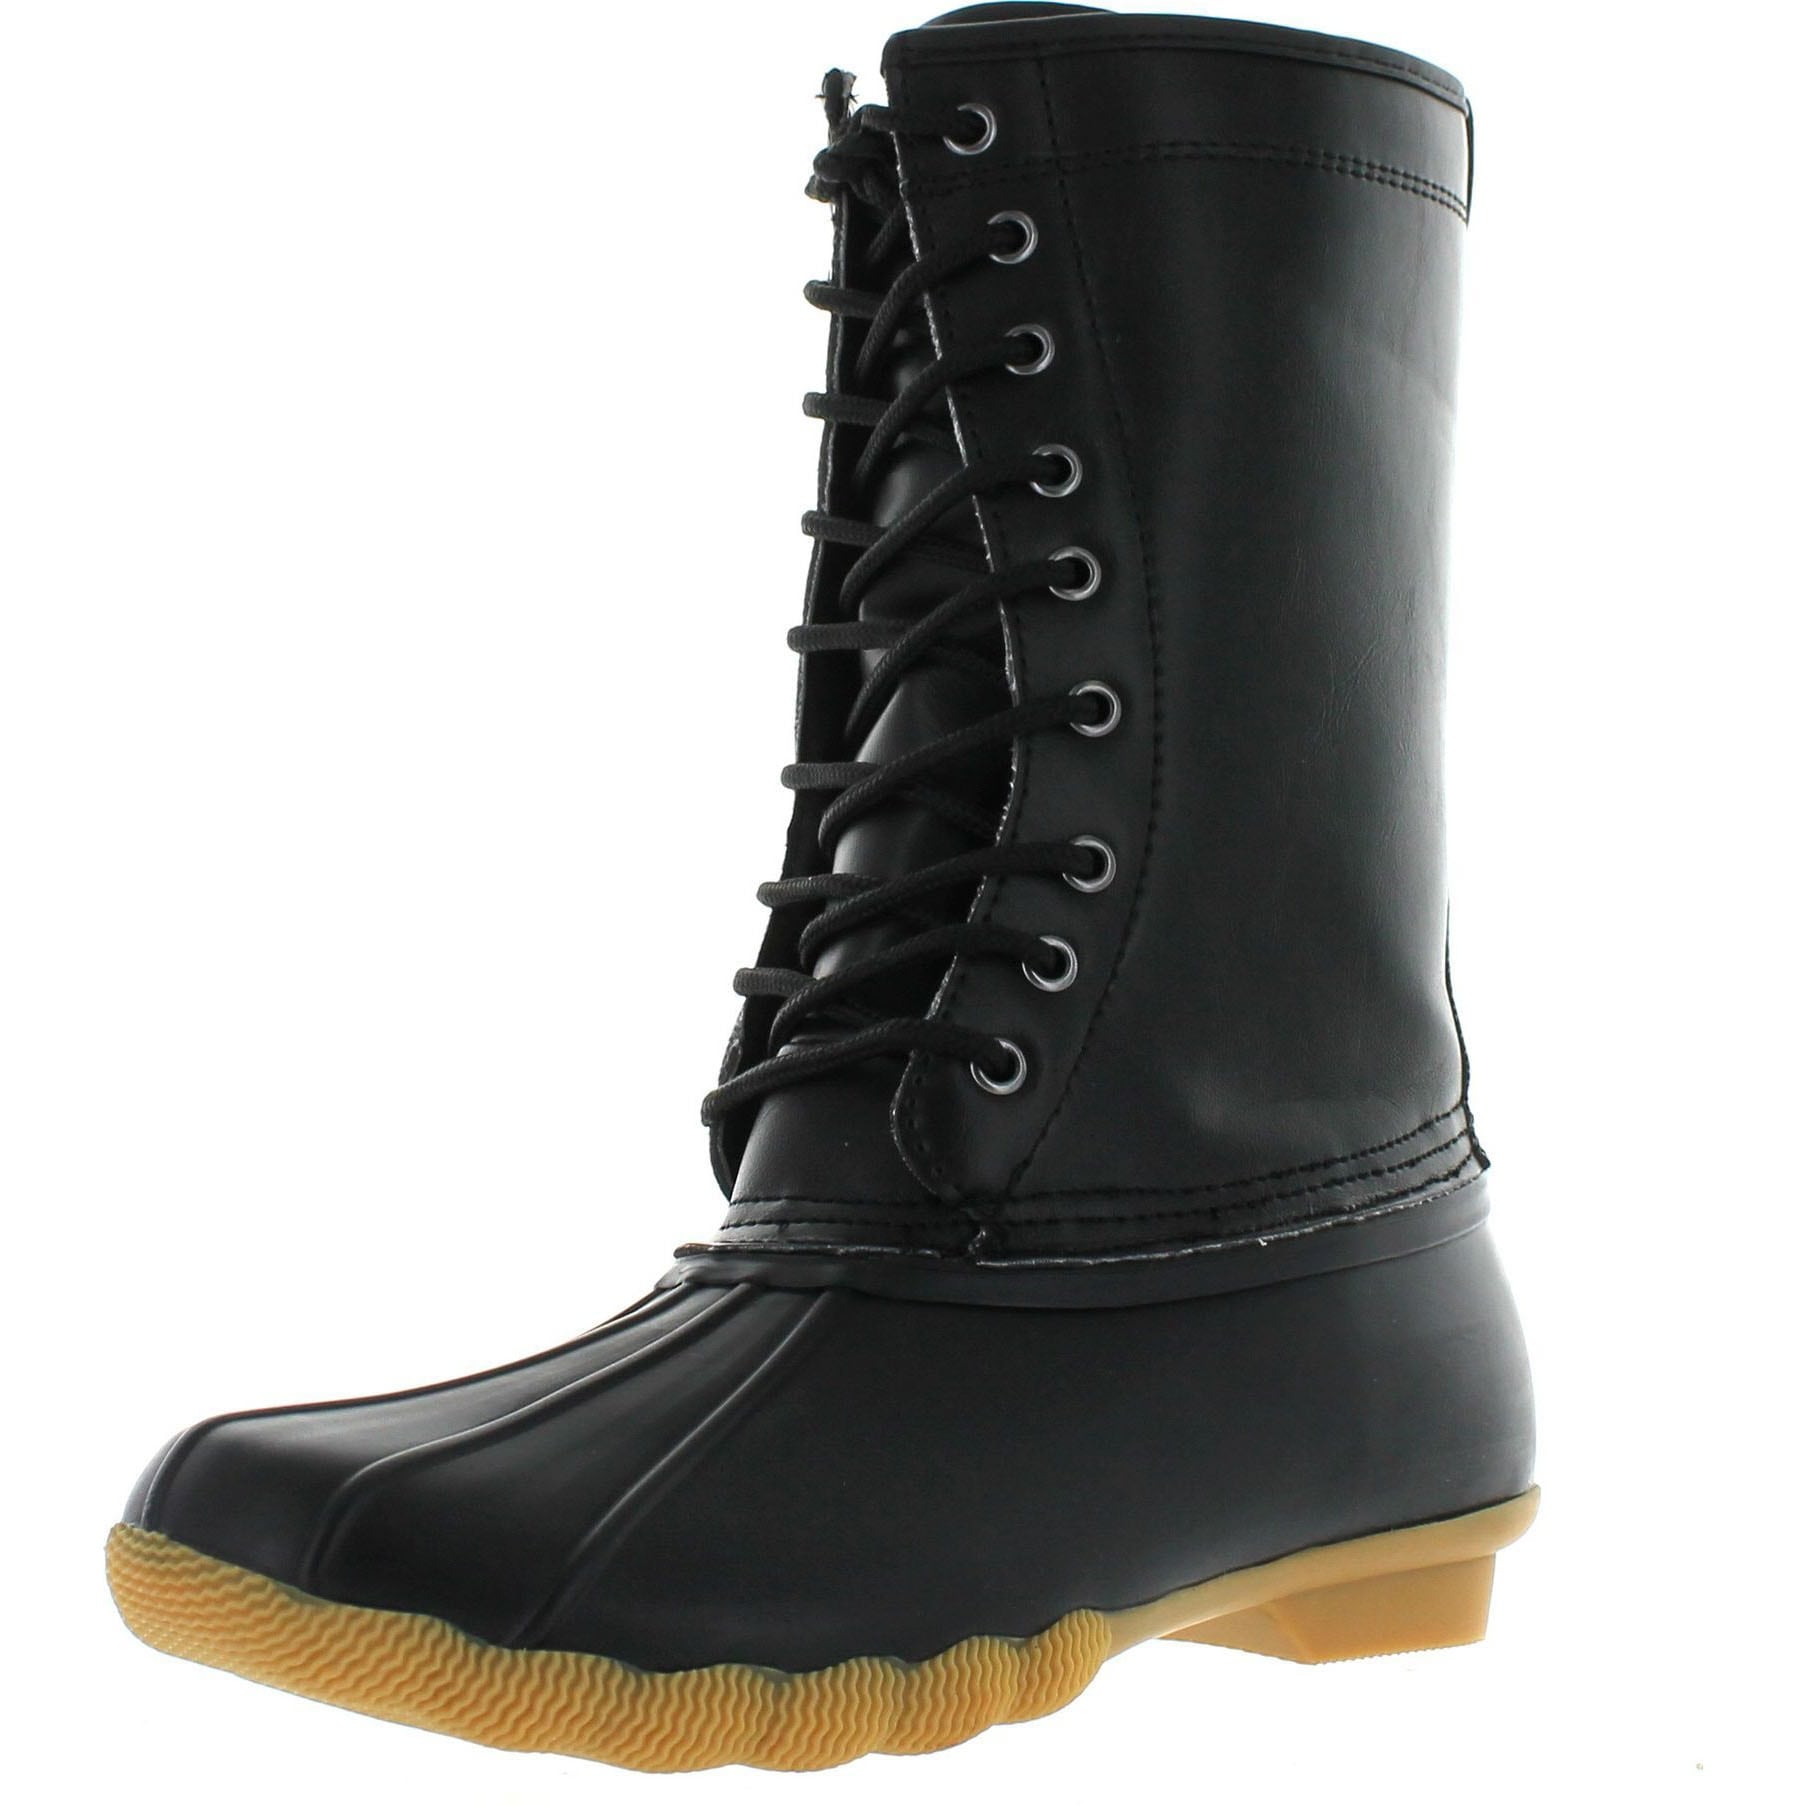 women's lace up winter boots